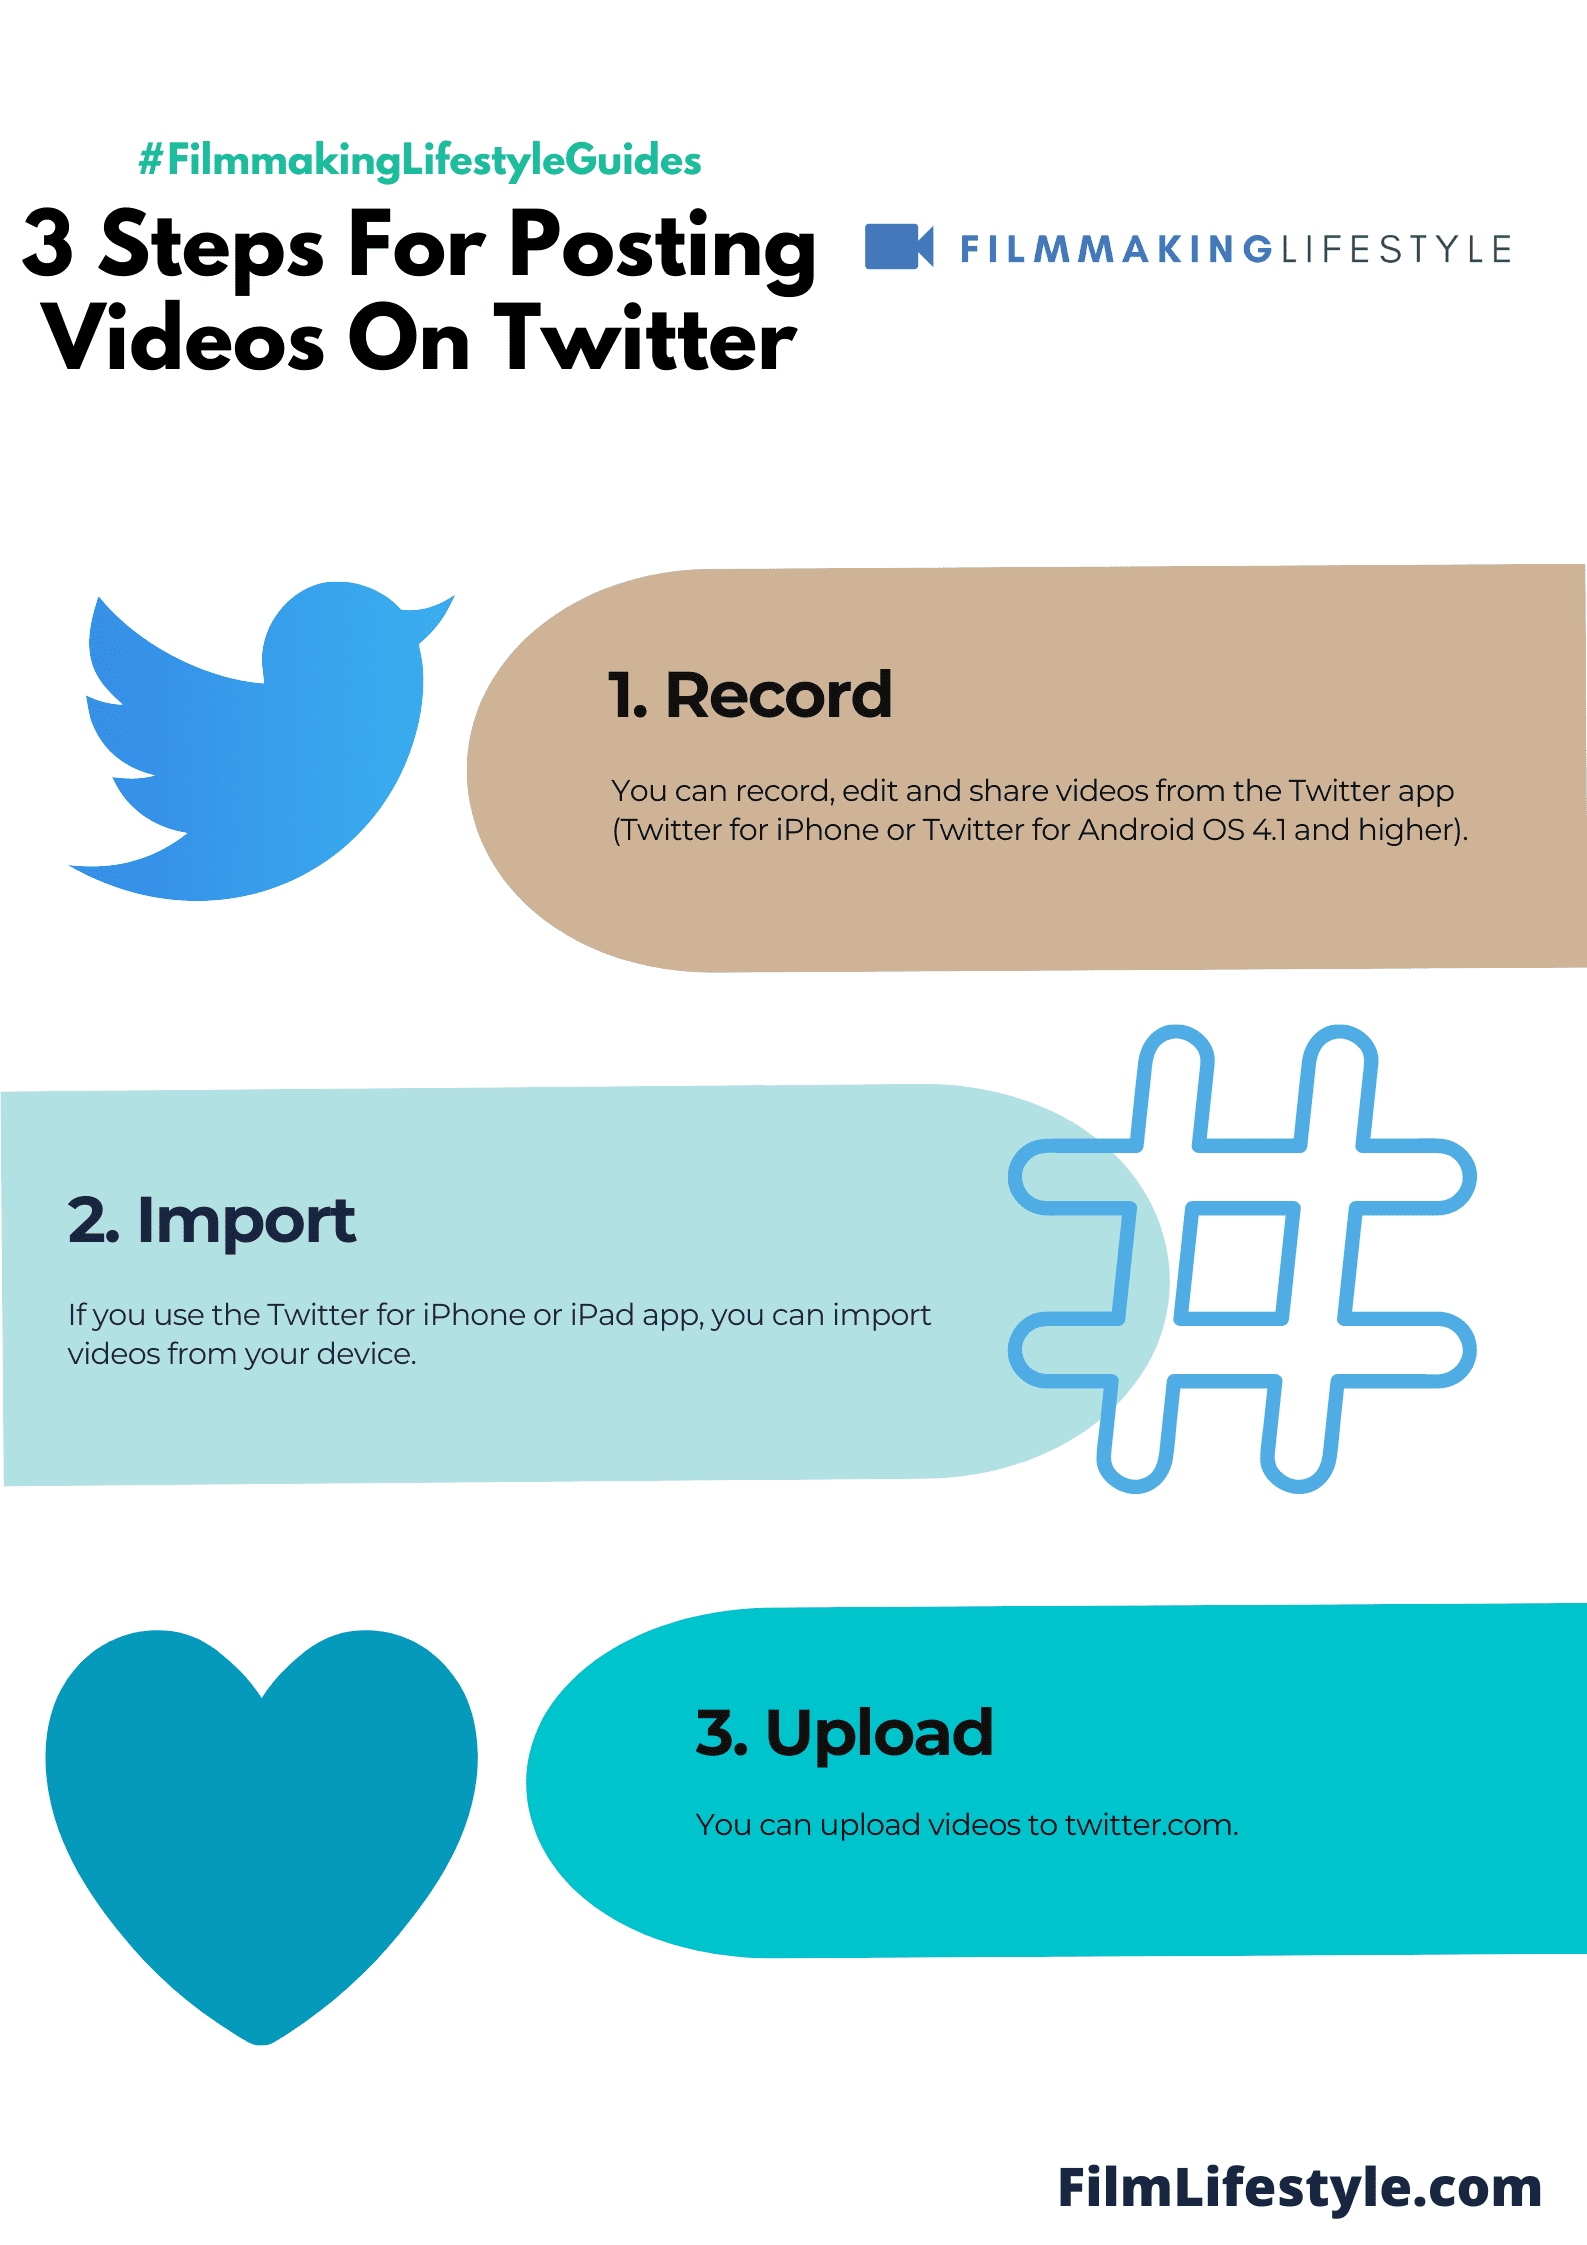 How To Post Videos On Twitter